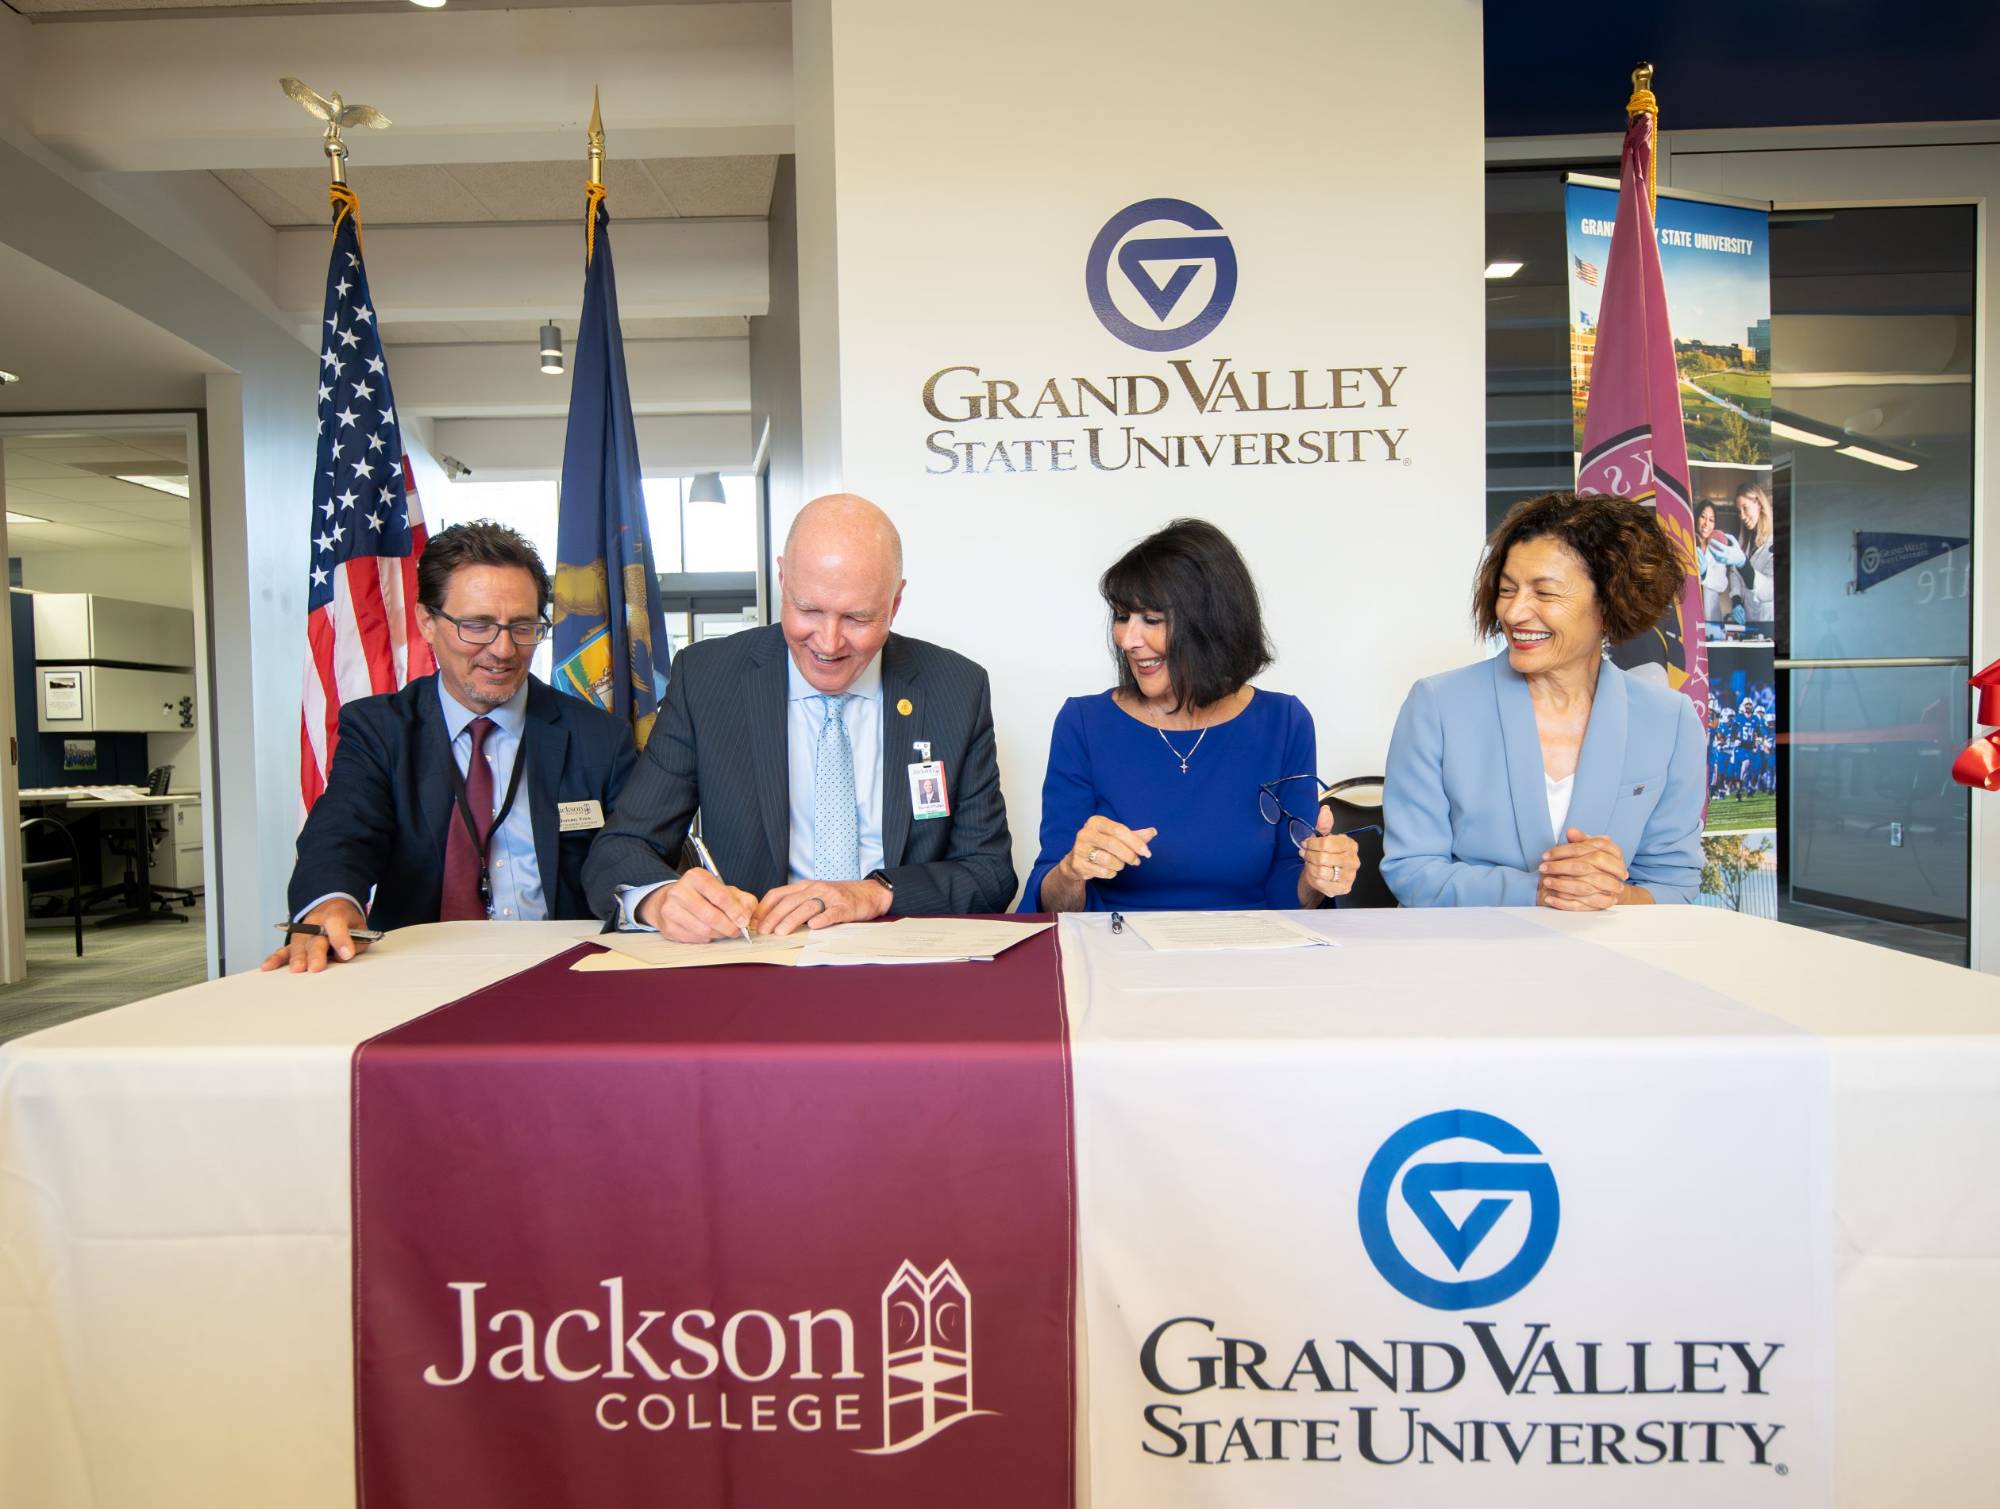 GVSU and Jackson College leaders sitting at a table signing documents